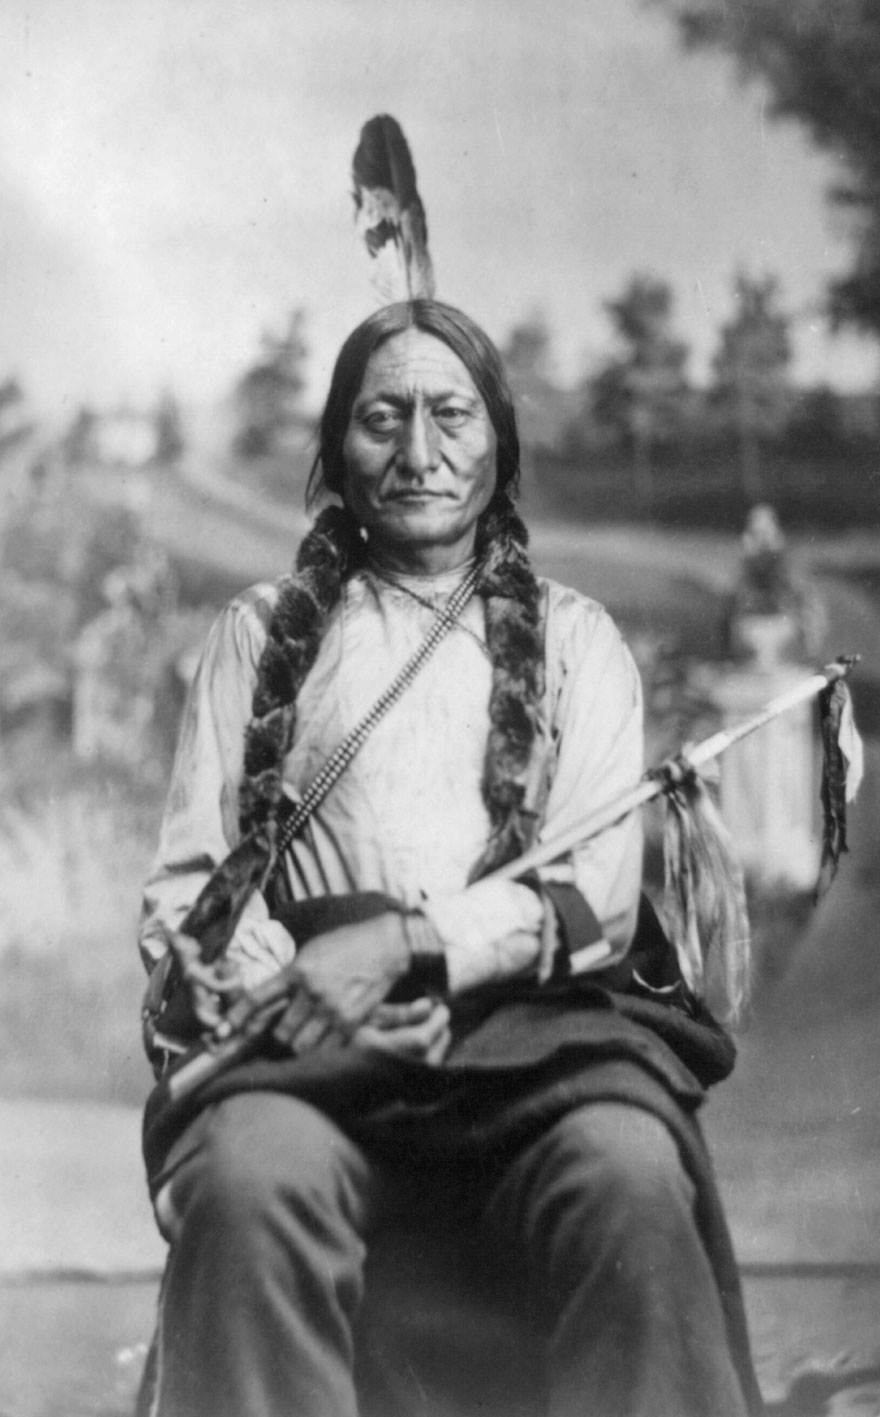 How Did Sitting Bull Prove His Bravery?